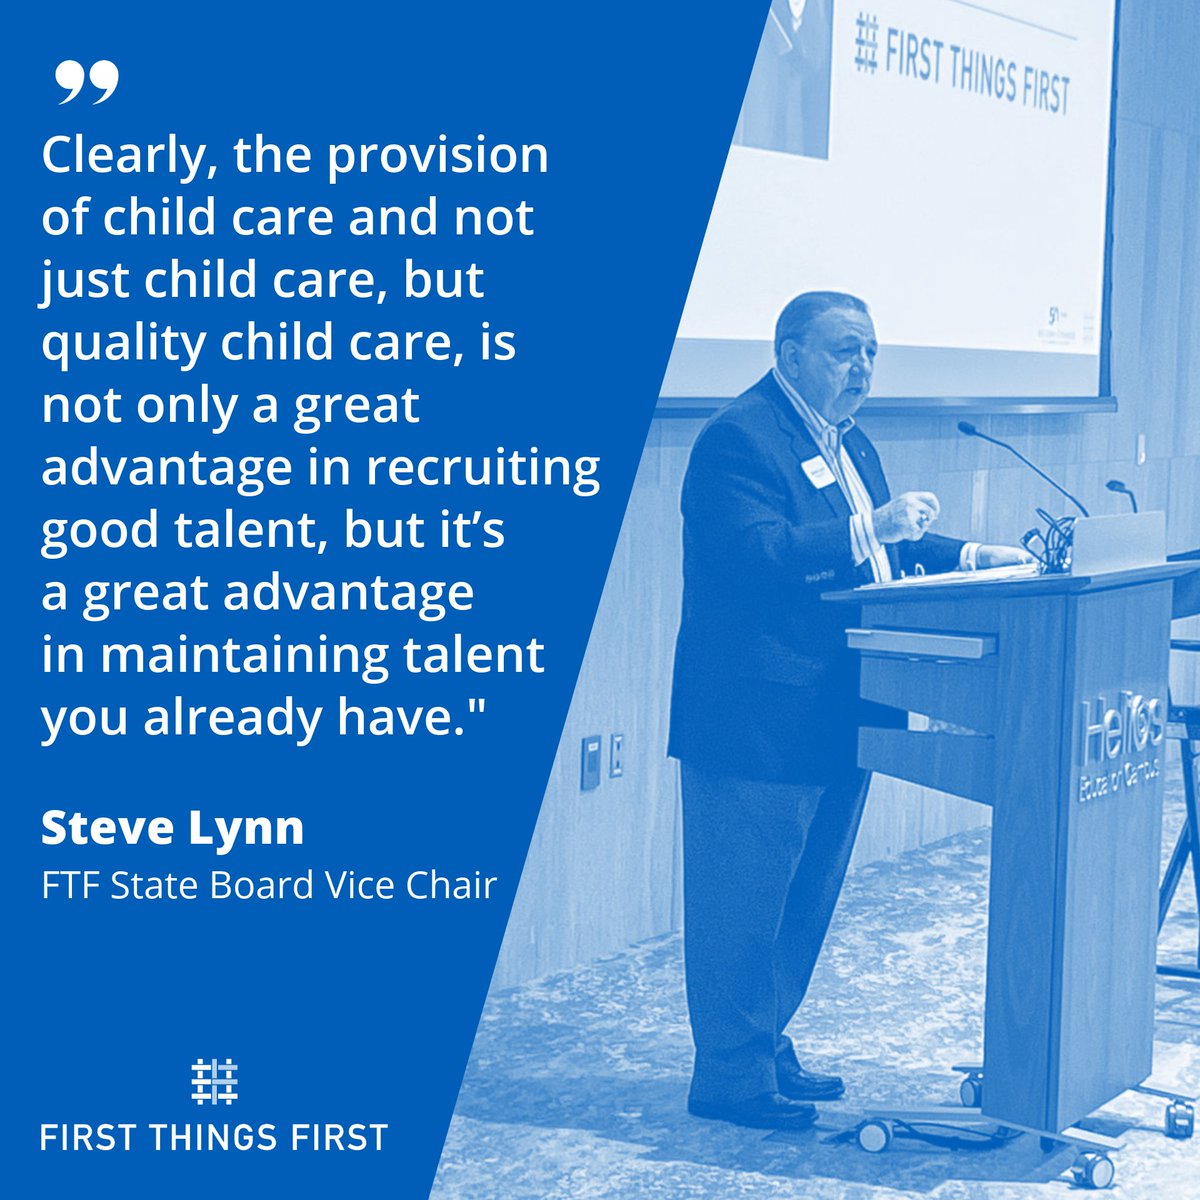 #ChildCare allows parents to go to work, enables businesses to hire and retain workers, and invests in our children's futures. As our FTF State Board Vice Chair Steve Lynn shared at the Child Care Crisis Forum last week, if you know someone who should be included at the table,